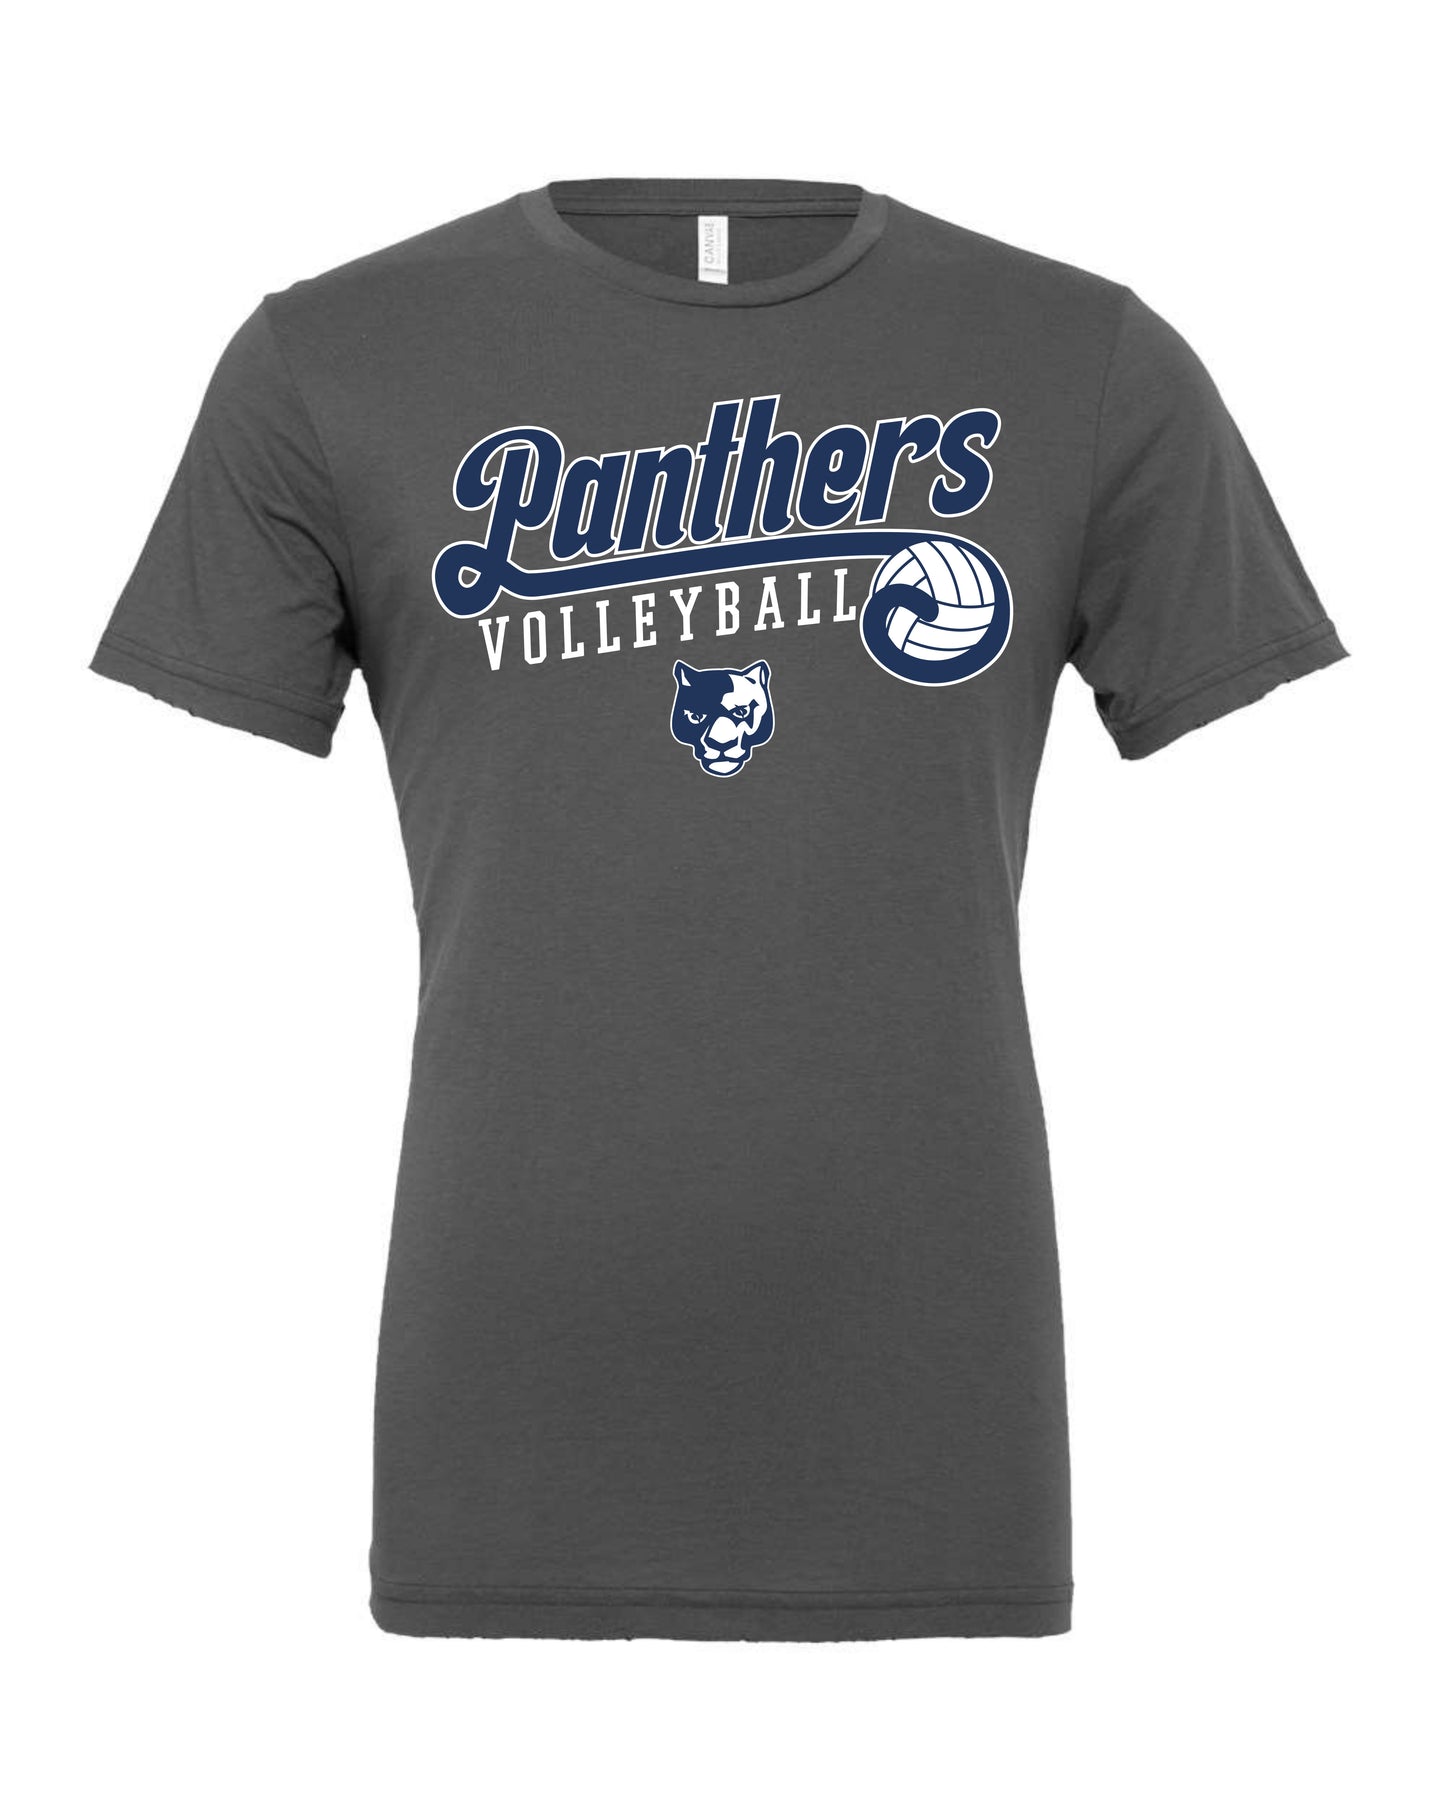 Panthers Volleyball Retro - Youth Tee